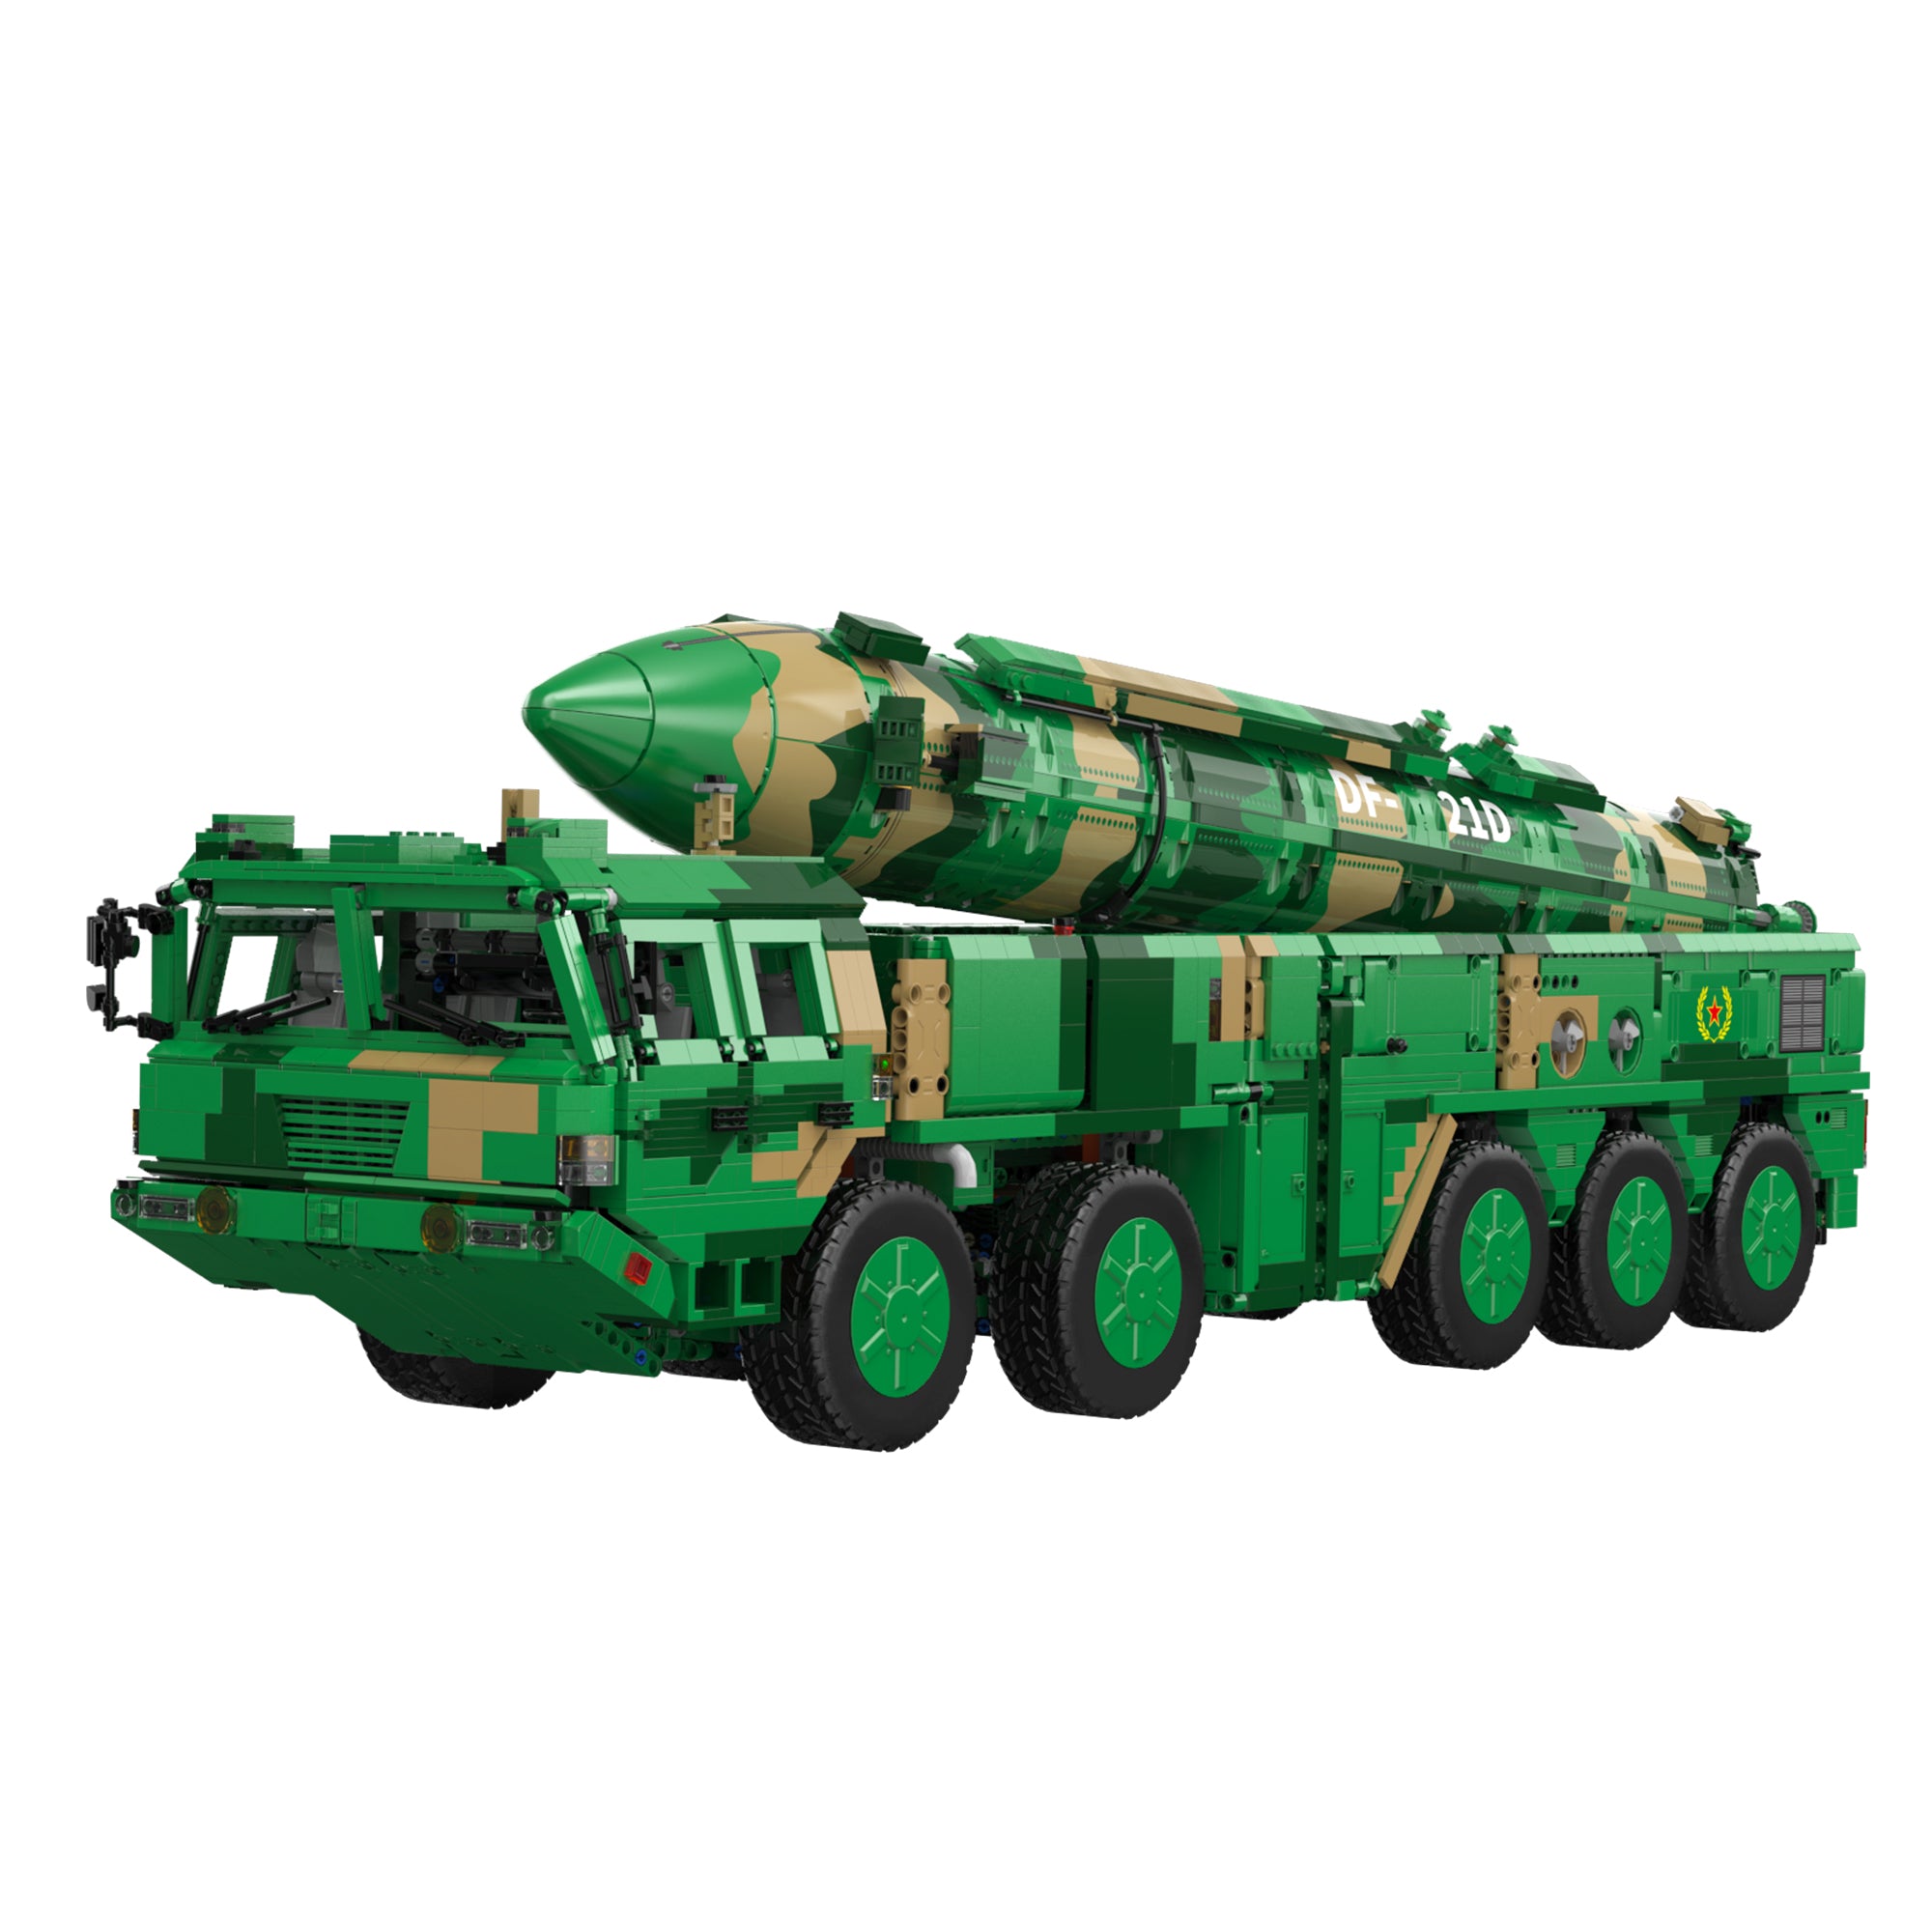 CaDA DongFeng-21D Anti-Ship Ballistic Missile | C56031W